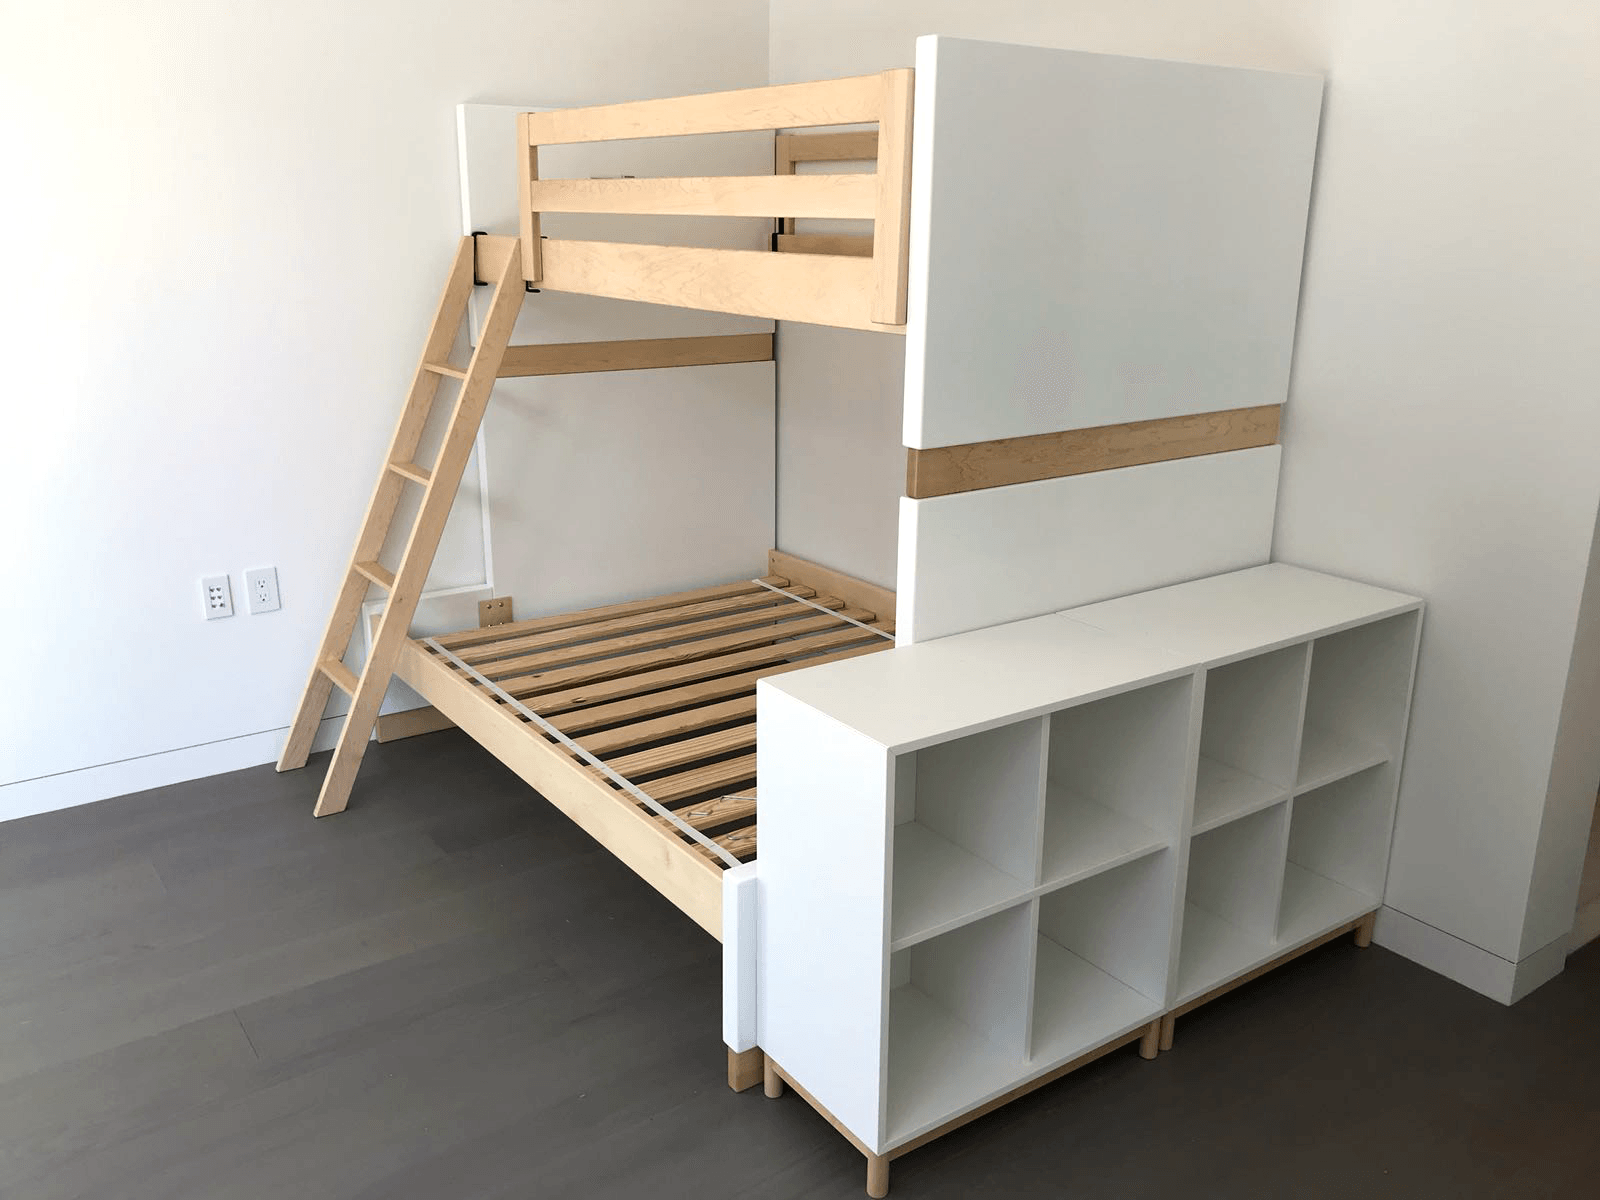 Utility and design of double bunk bed furniture